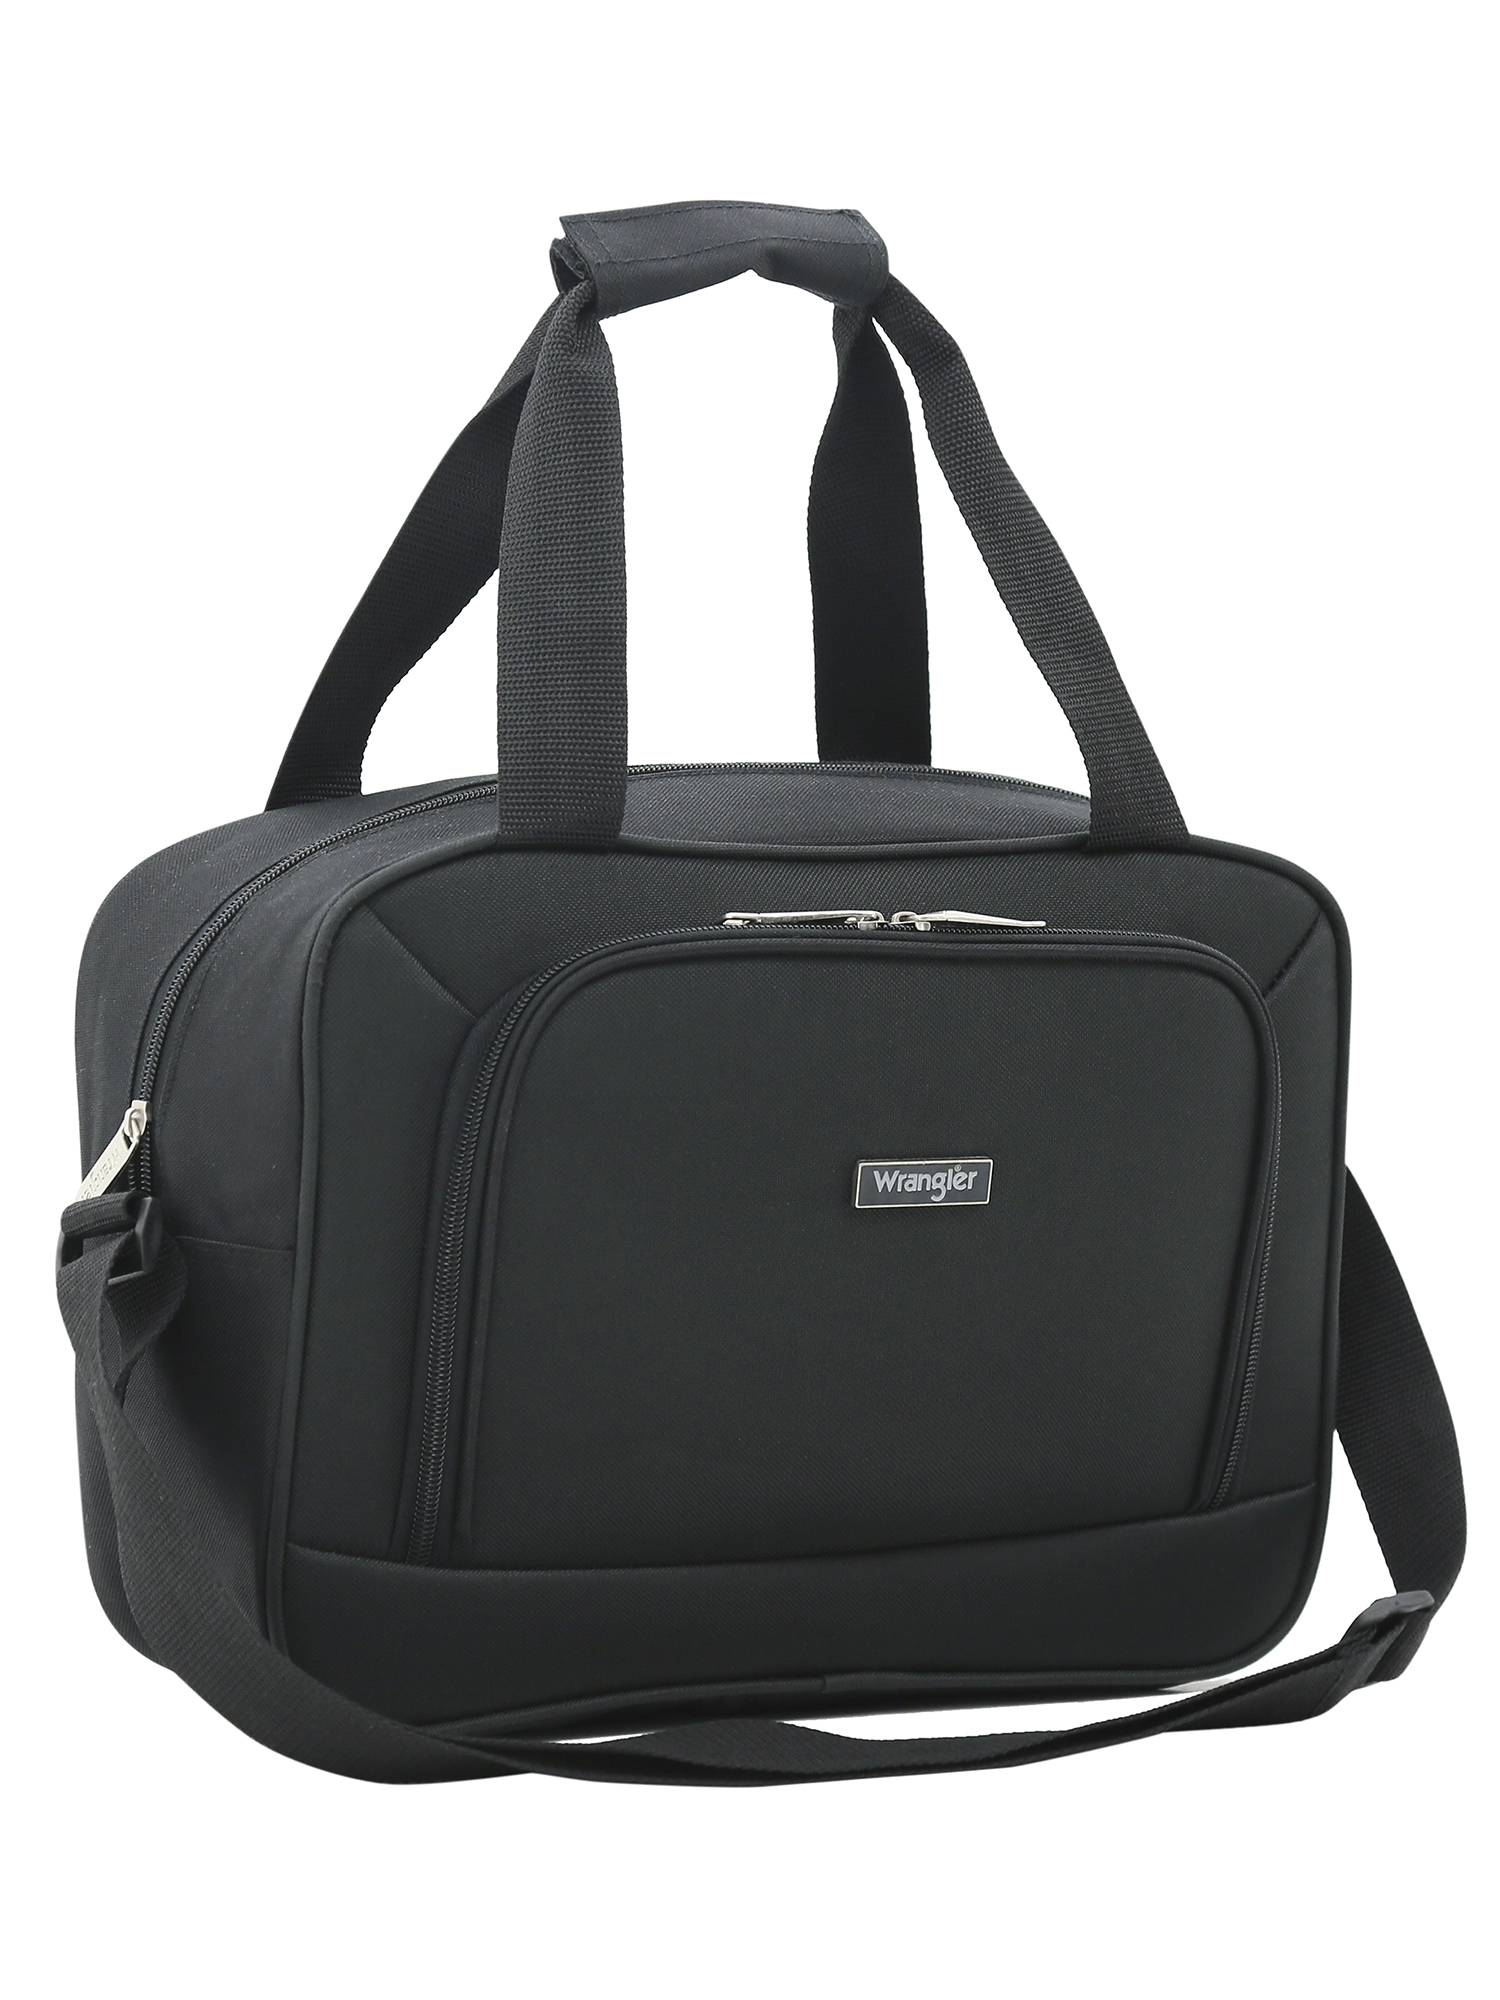 Wrangler 2pc Expandable Rolling Carry-on Set, Black - image 5 of 14